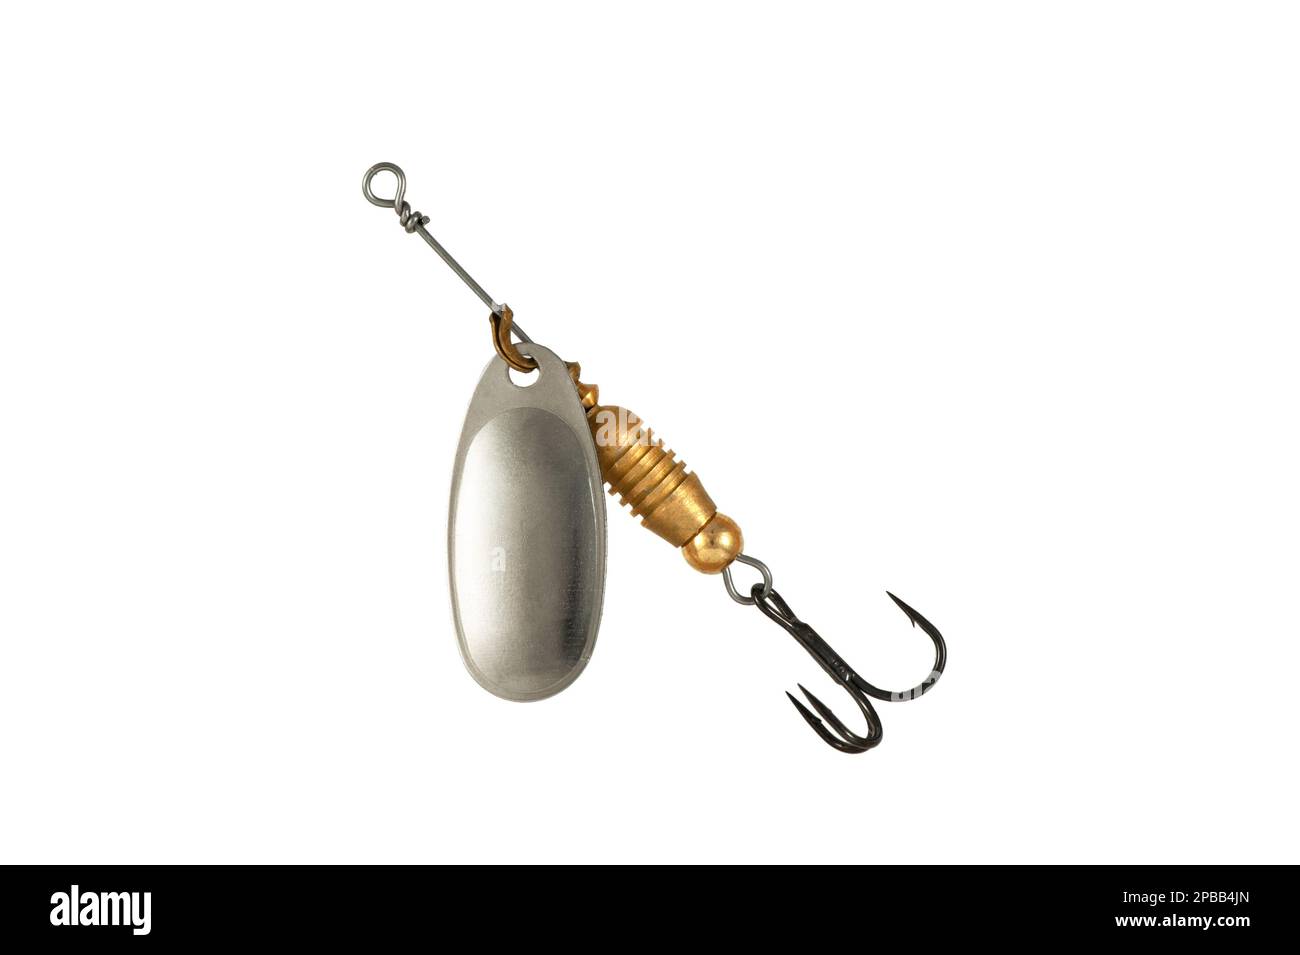 https://c8.alamy.com/comp/2PBB4JN/fishing-spinner-spoon-lure-isolated-on-white-background-tackles-for-catching-of-fishes-2PBB4JN.jpg